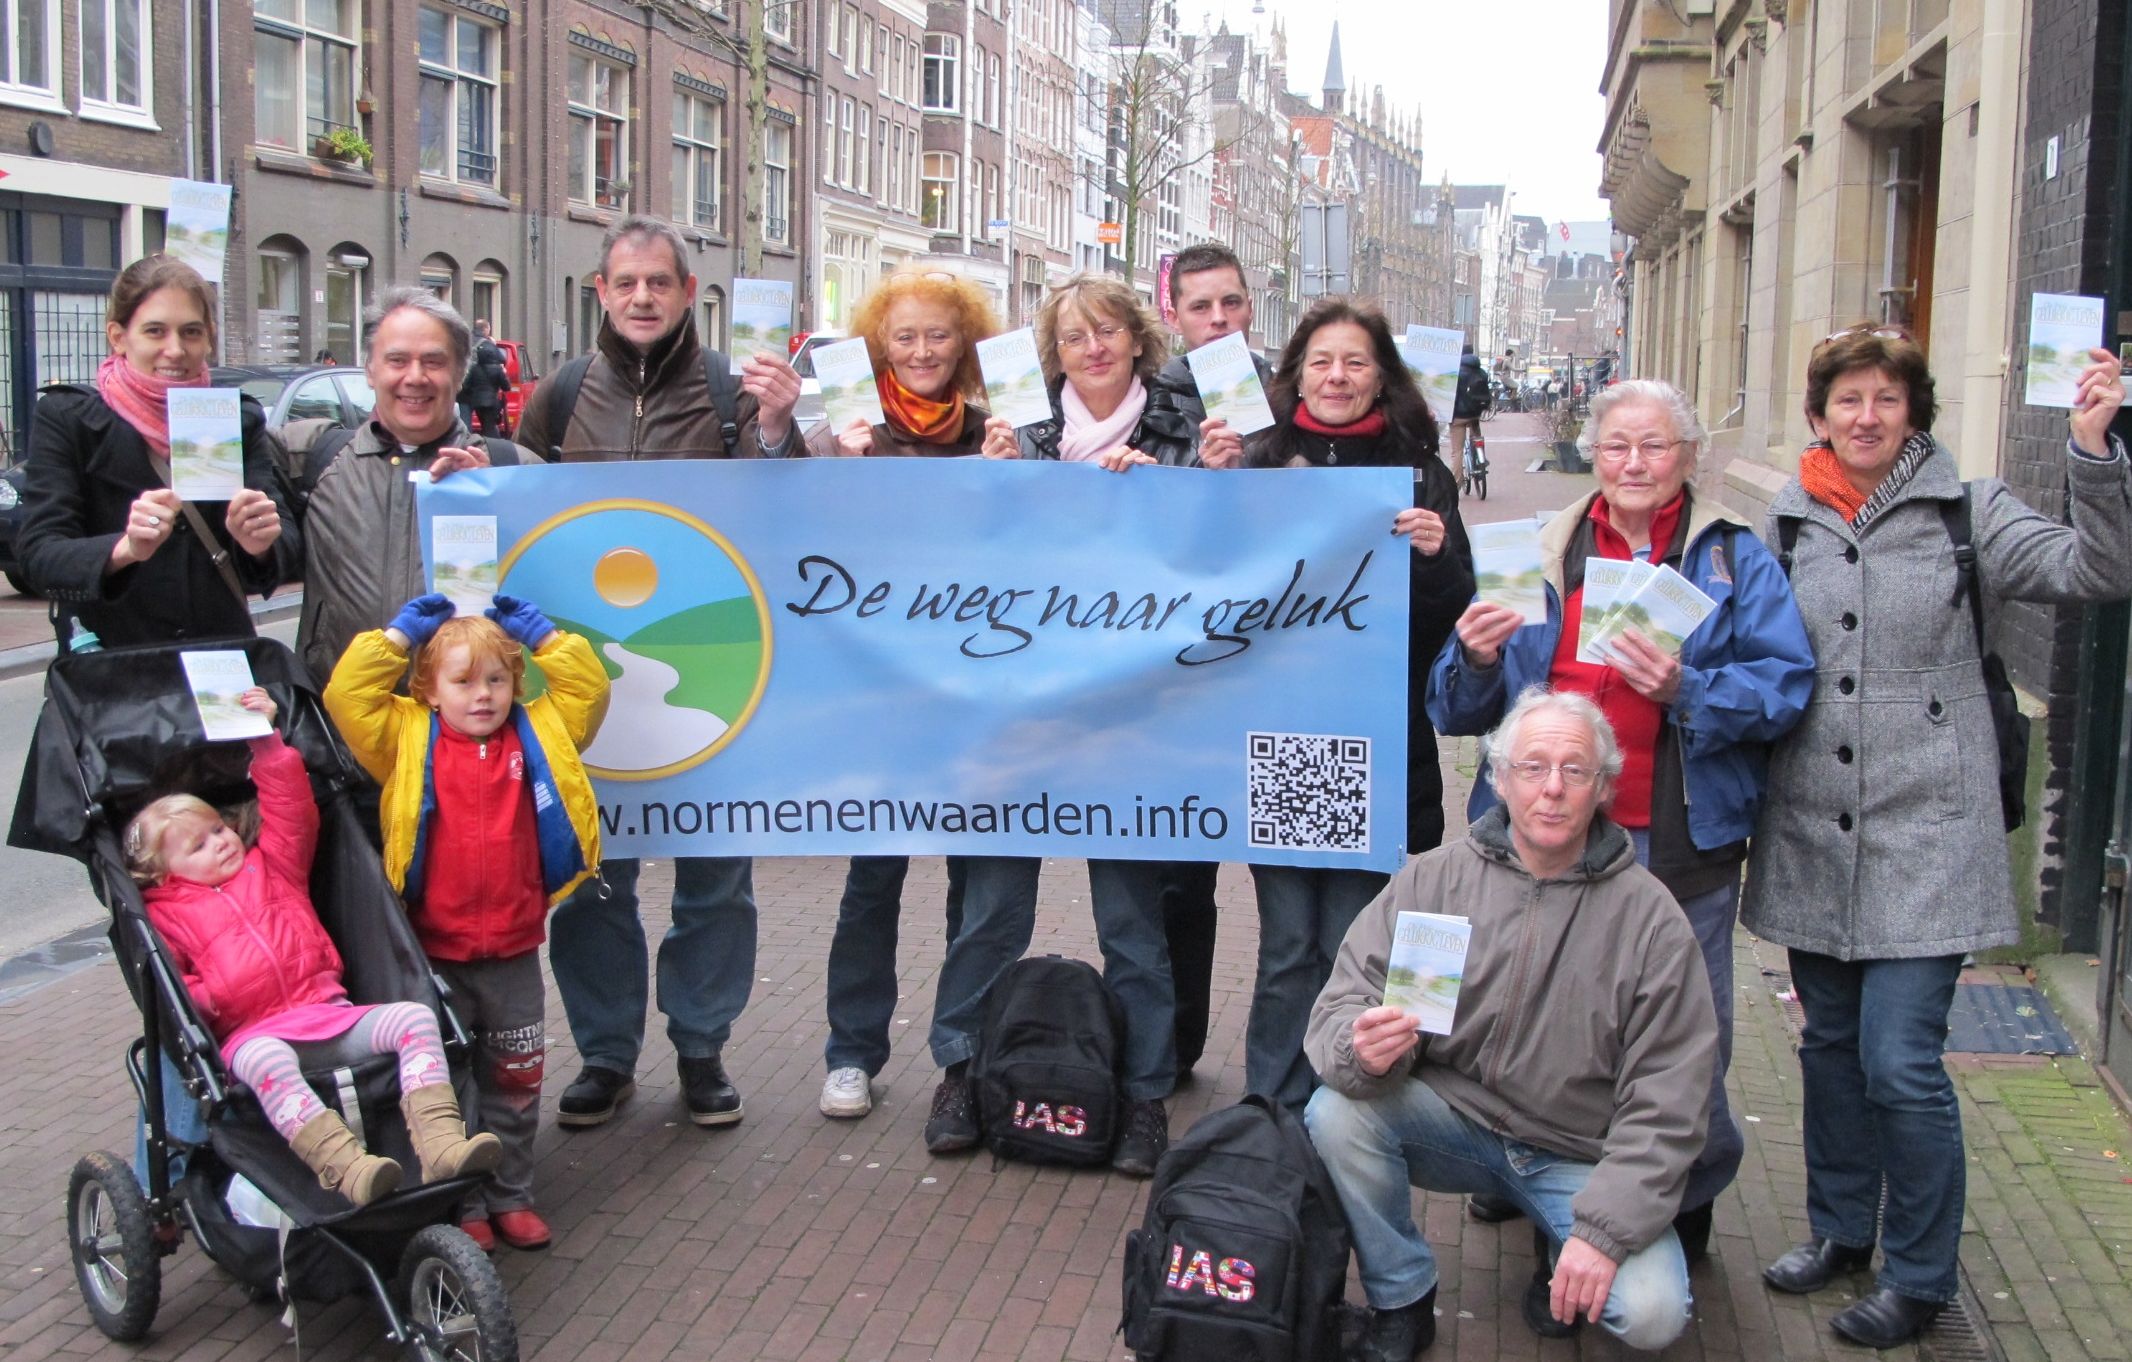 Dutch Scientologists, working to raise the moral and ethical climate of the Netherlands through The Way to Happiness